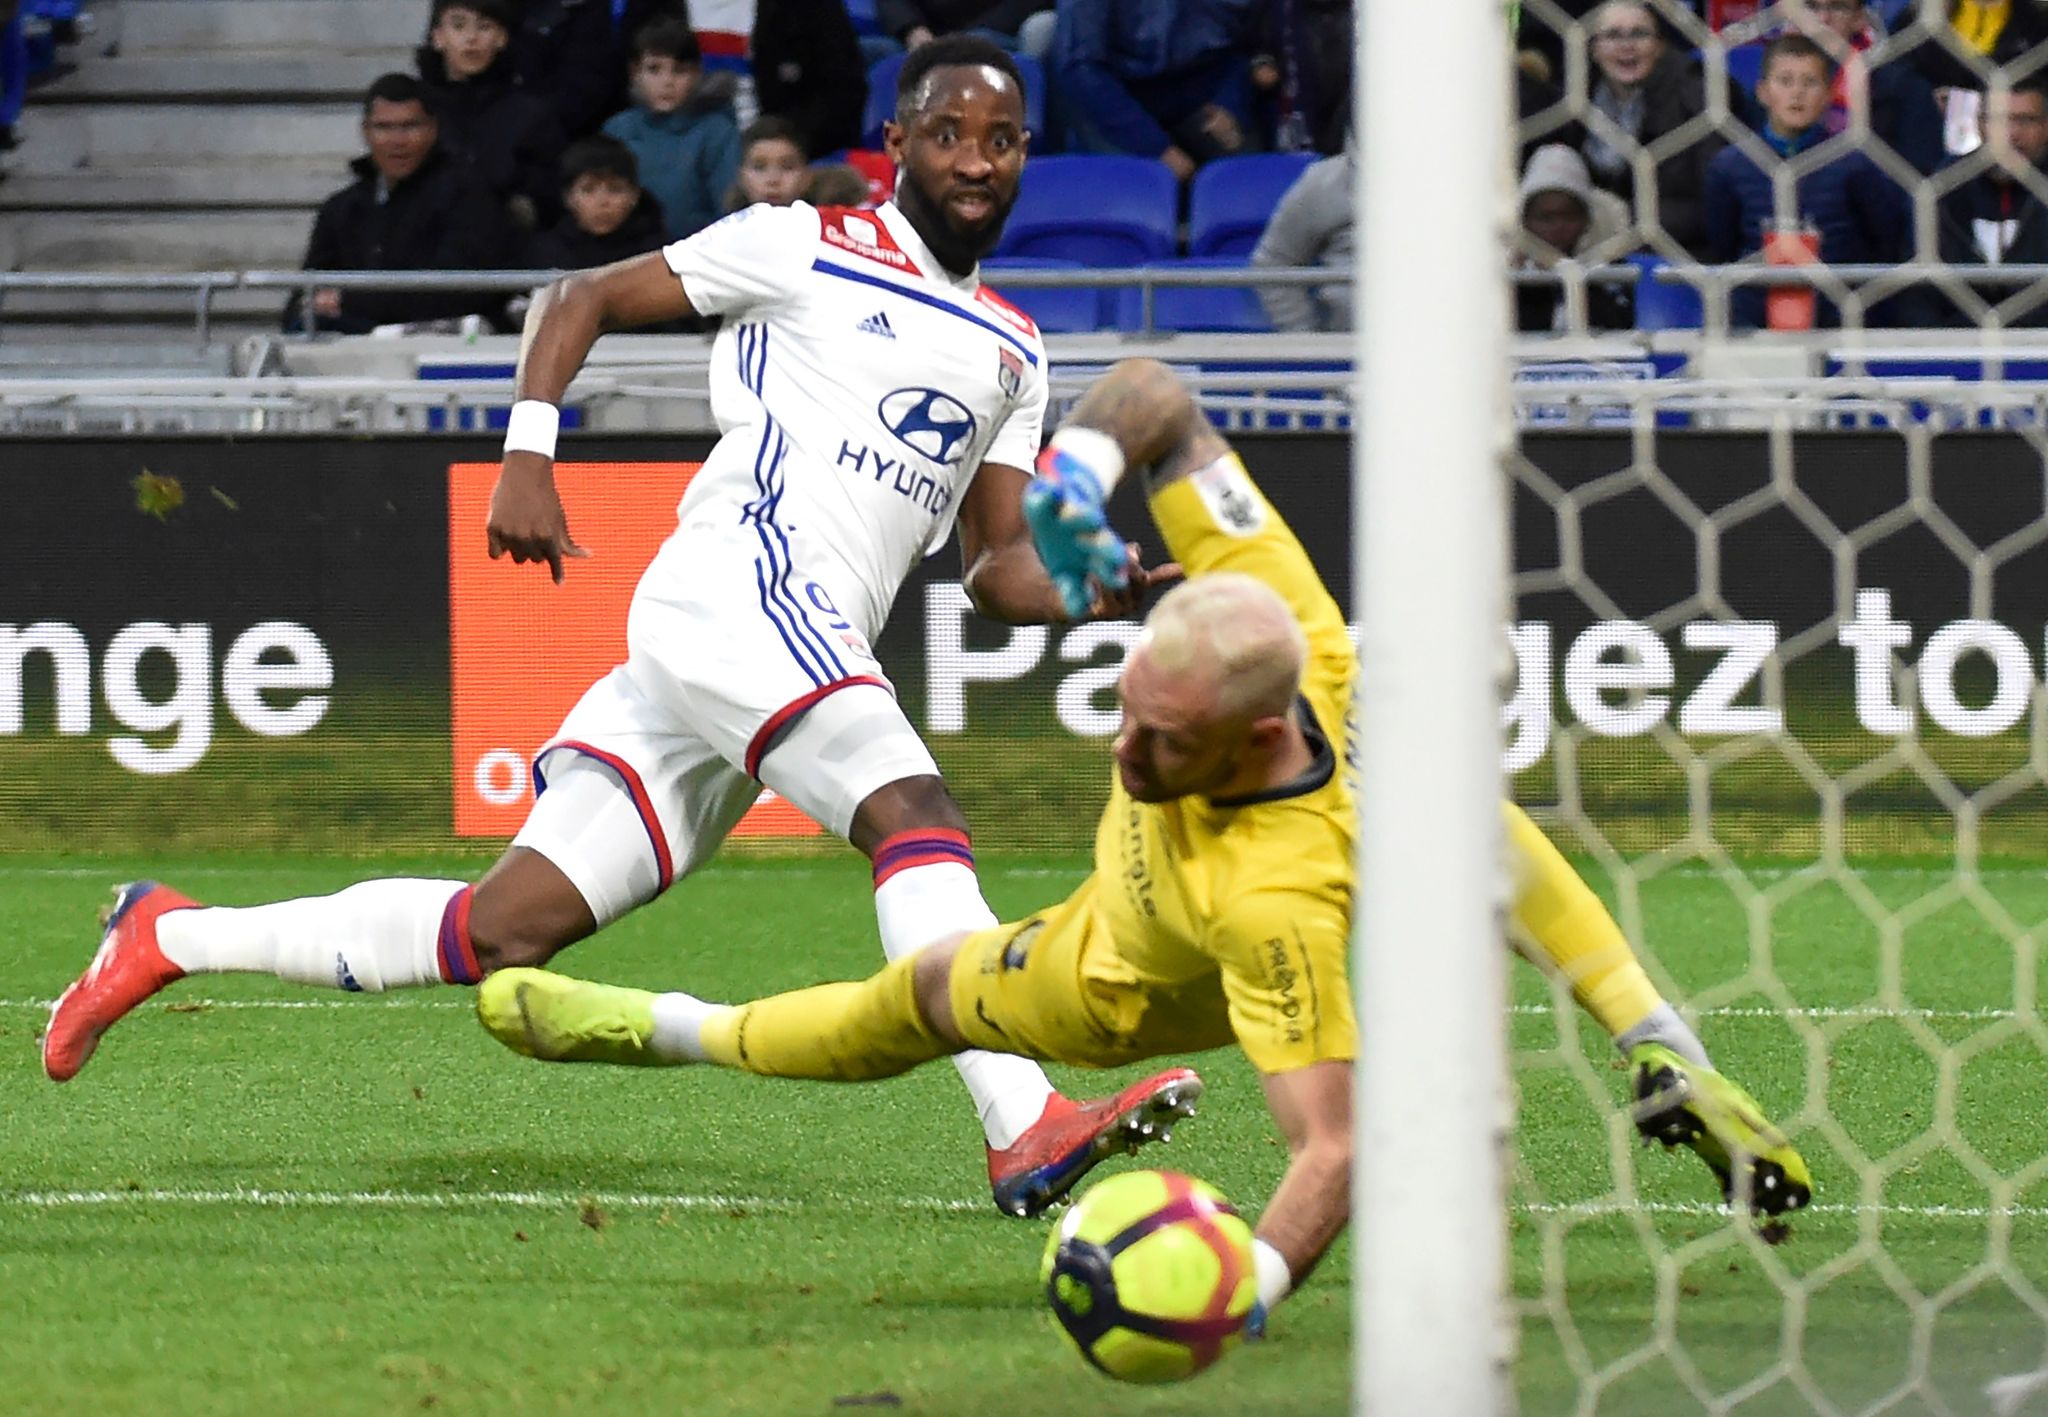 <HIT>Lyon</HIT>s French forward Moussa Dembele scores a goal during the French L1 football match <HIT>Lyon</HIT> vs Toulouse, on March 3, 2019 at the Groupama stadium in Decines-Charpieu near <HIT>Lyon</HIT>, southeastern France. (Photo by JEAN-PHILIPPE KSIAZEK / AFP)